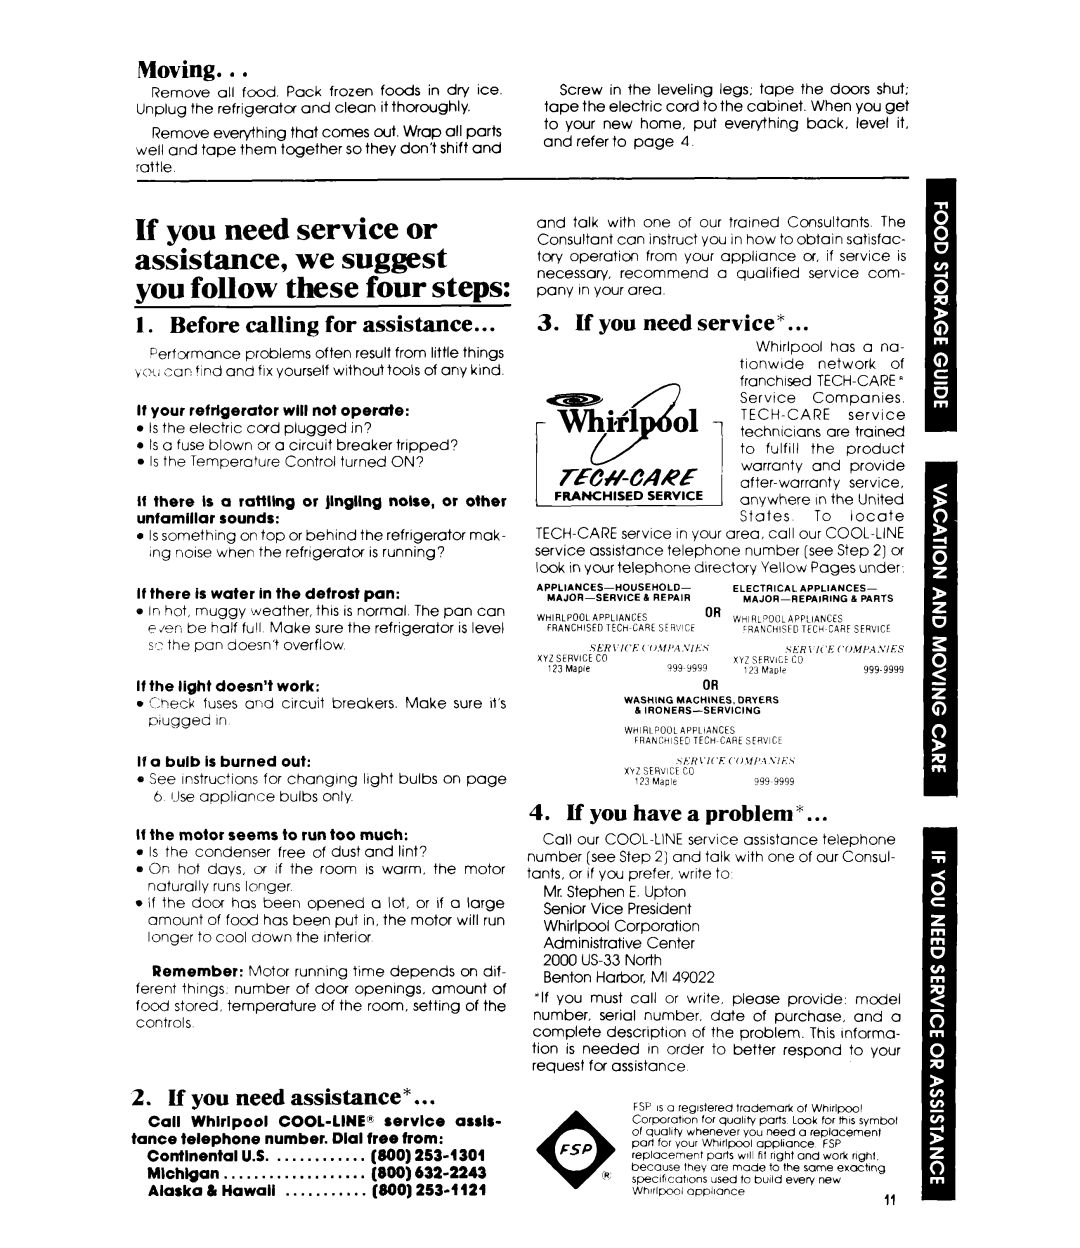 Whirlpool ET12DC manual Before calling for assistance, If you need assistance, If you needservice”, If you have a problem” 